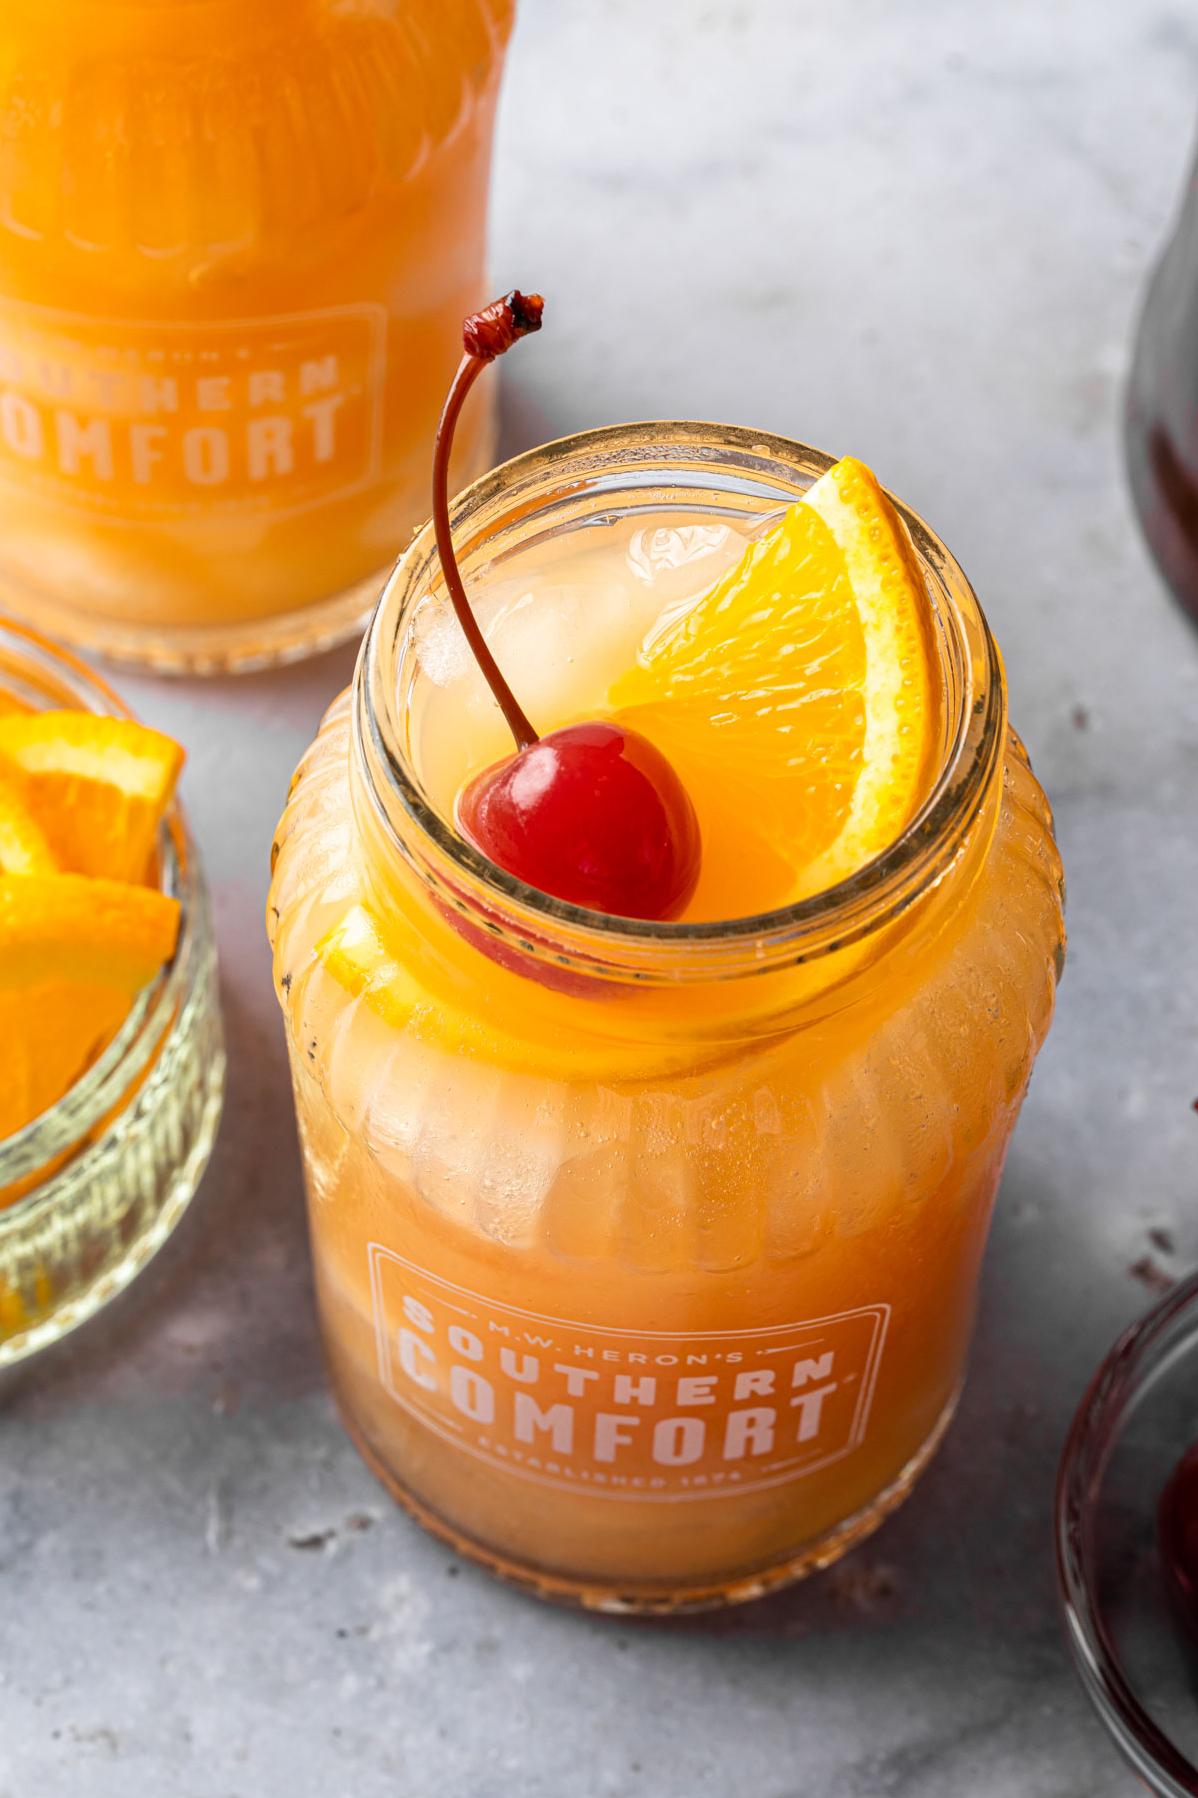  Sip on some Southern charm with this classic cocktail, Southern Comfort!